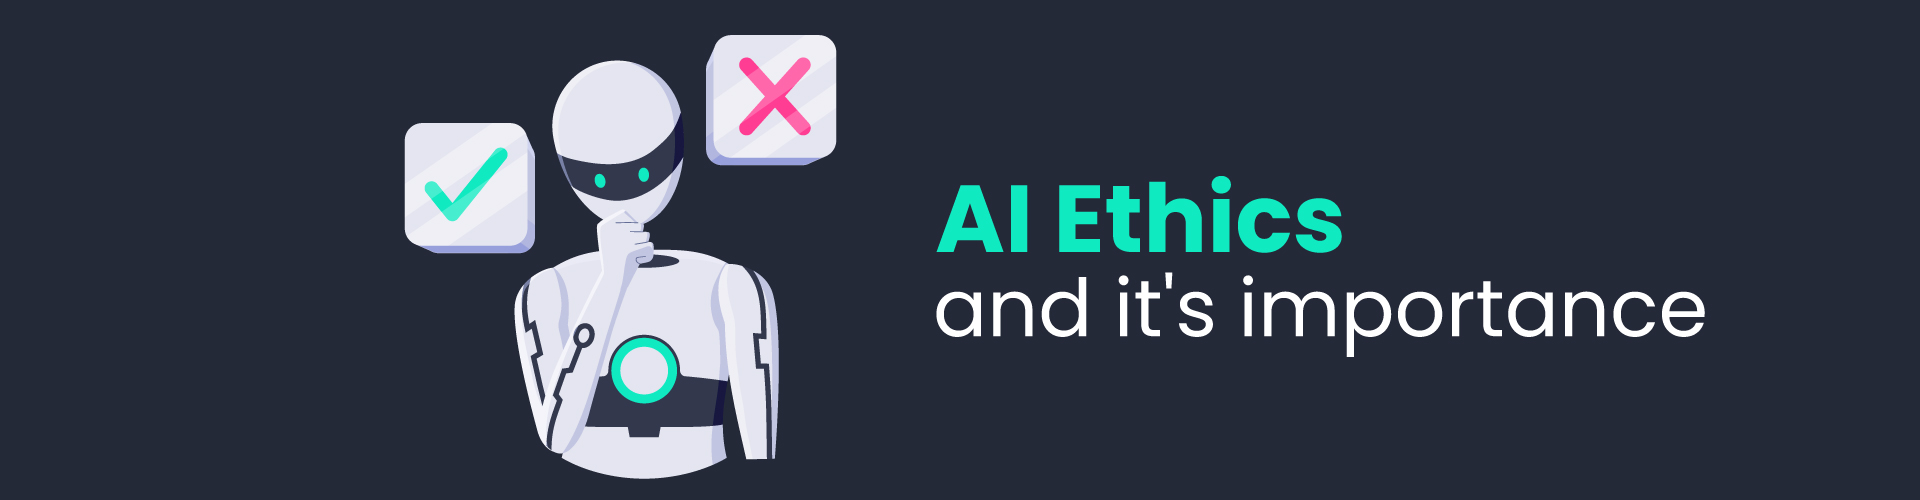 AI Ethics and its importance